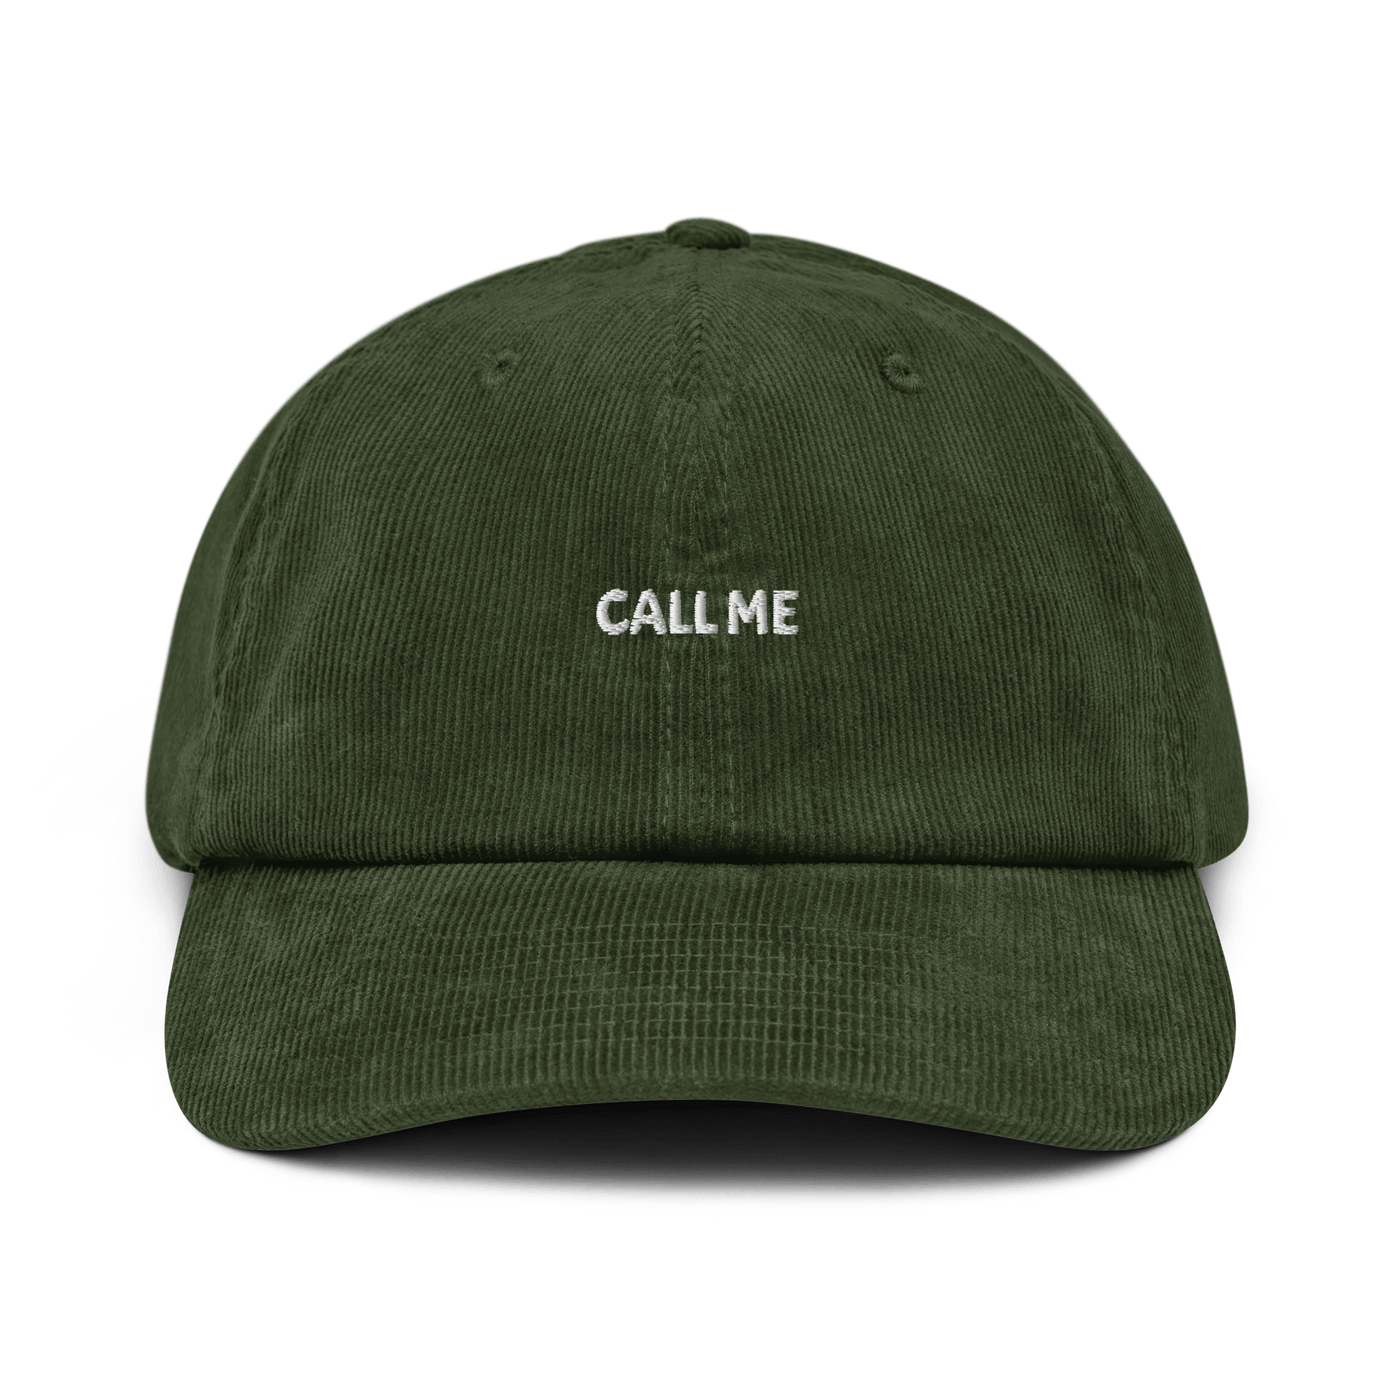 Call me Corduroy hat - Black - - Just Another Cap Store